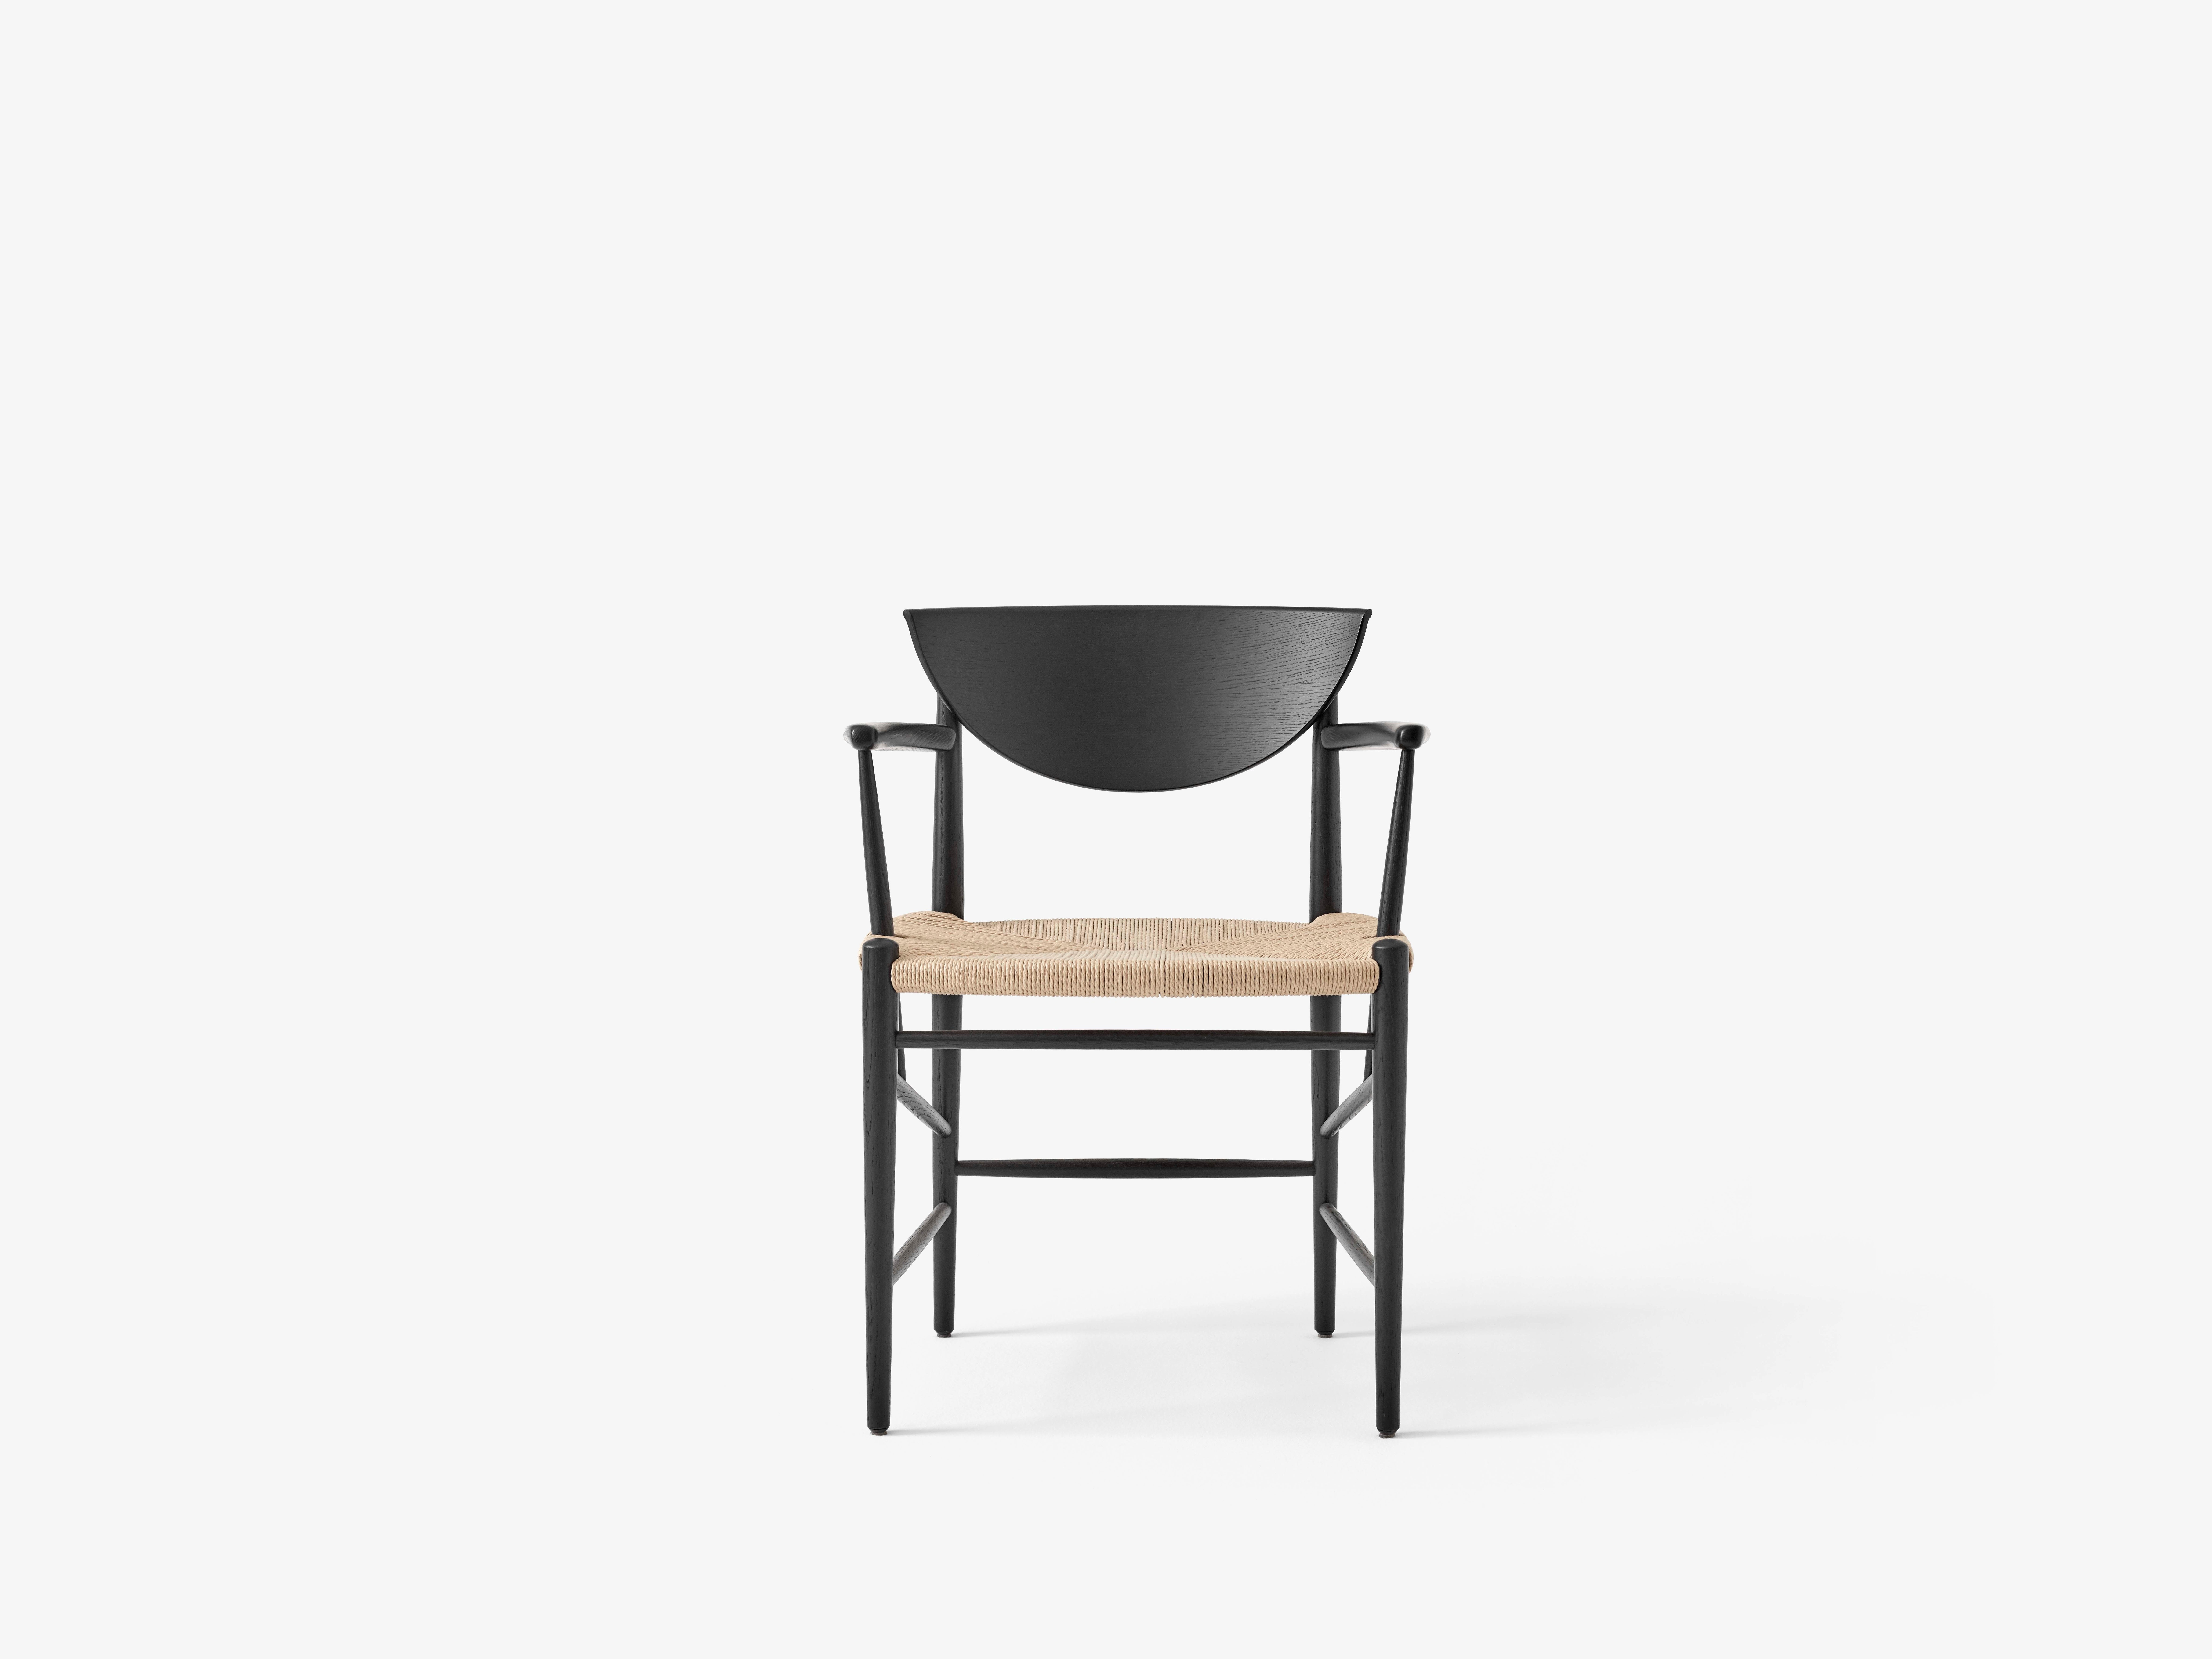 Scandinavian Modern Drawn HM4 Chair with Arm Rests, Black Lacquered Oak by Hvidt & Mølgaard for &T For Sale